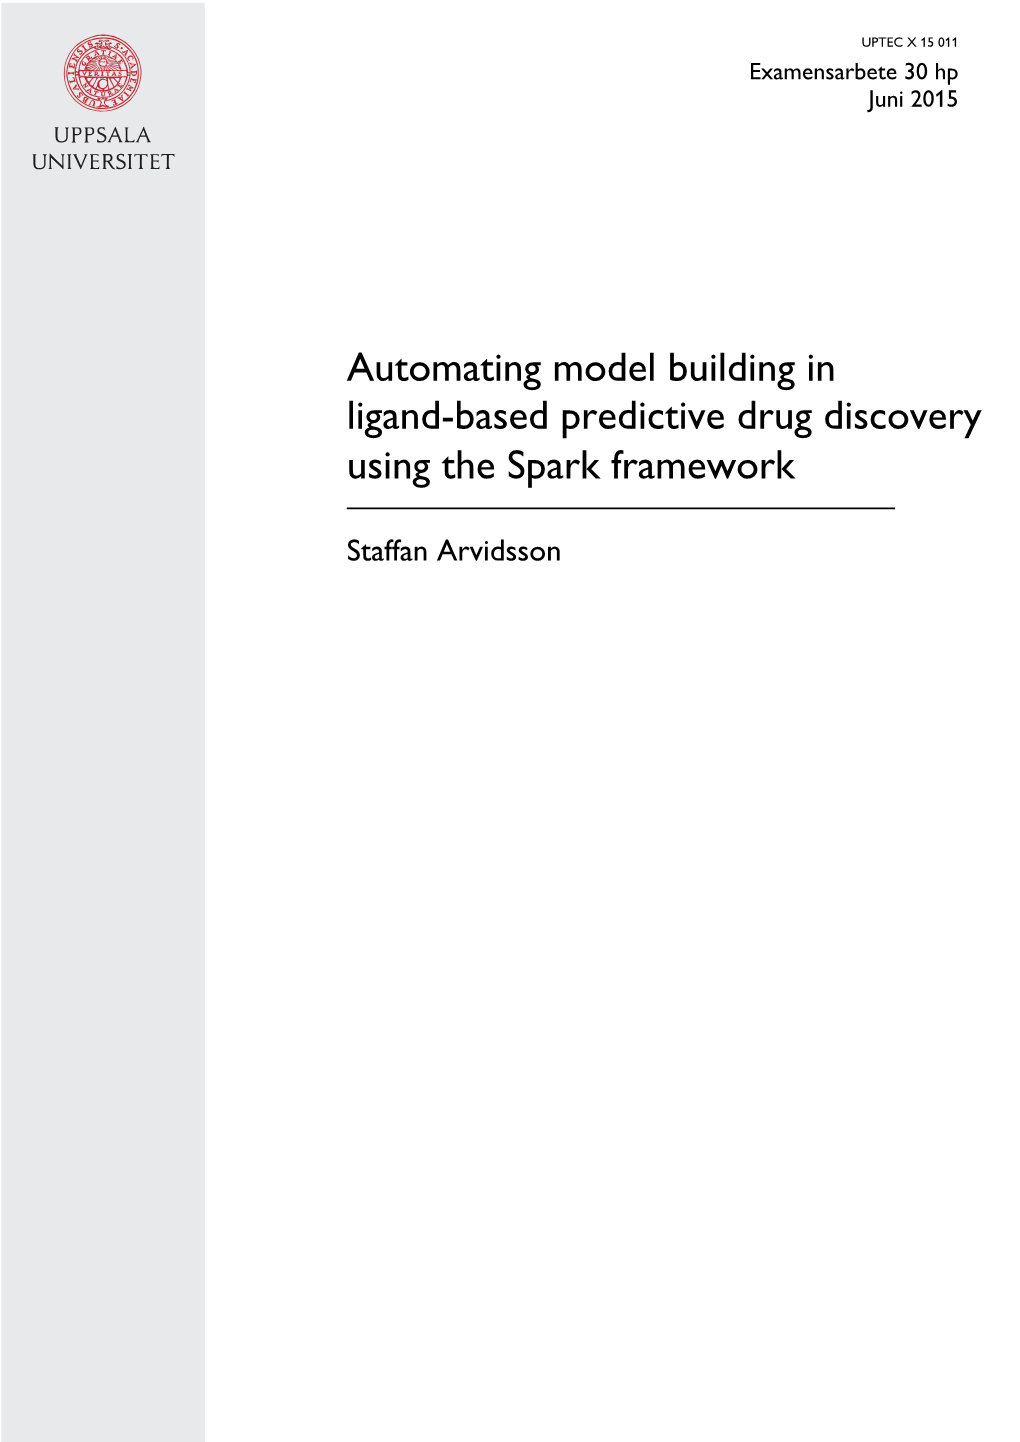 Automating Model Building in Ligand-Based Predictive Drug Discovery Using the Spark Framework